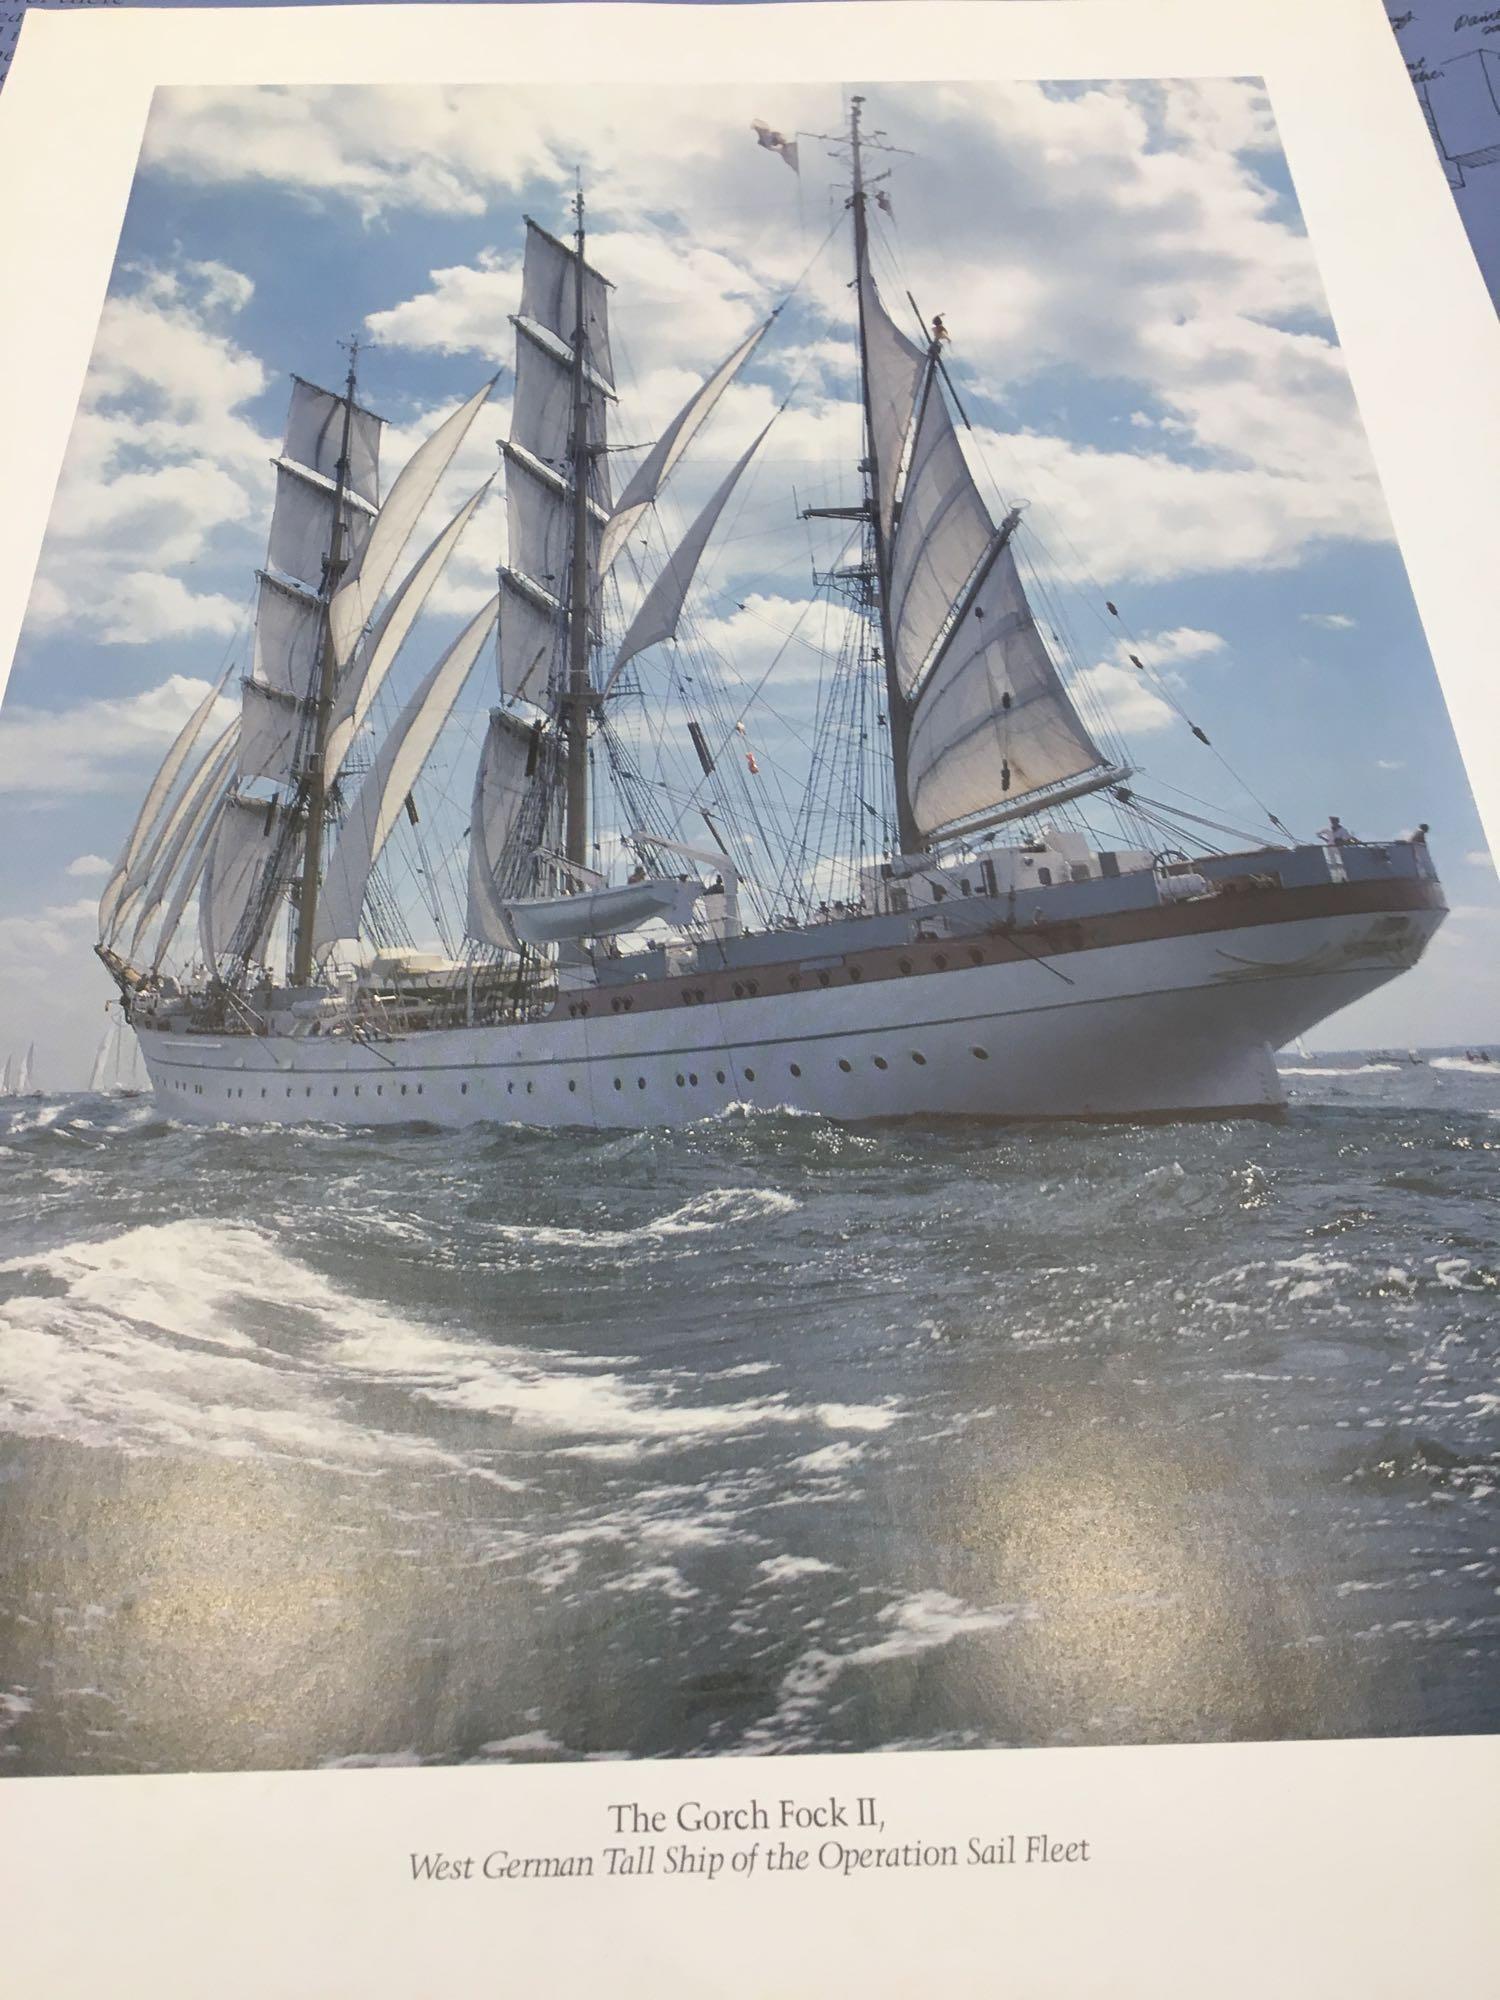 A photographic portfolio "Tall Ships Remembered"